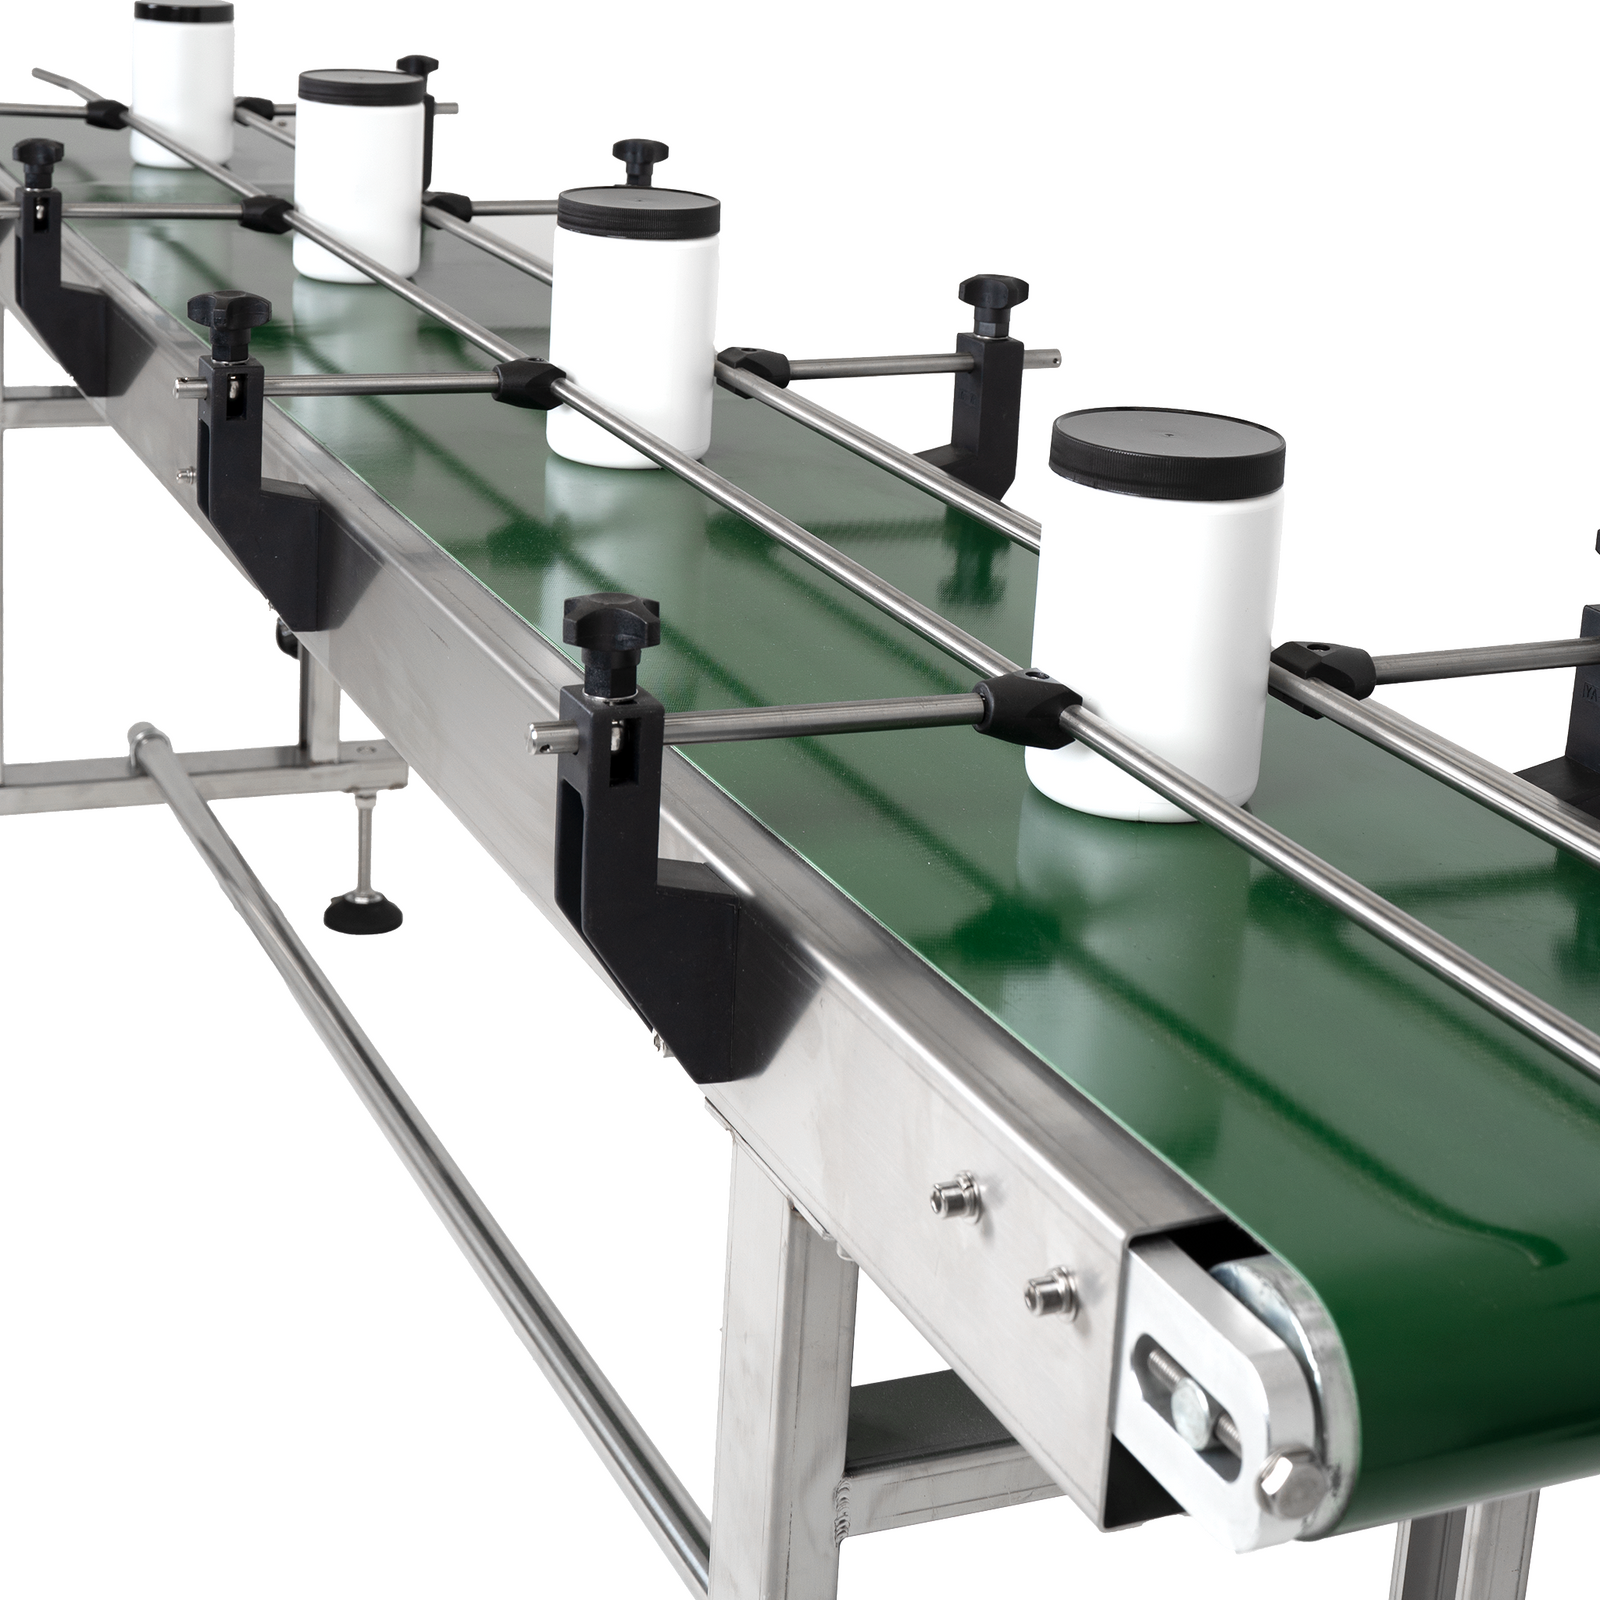 long motorized stainless steel belt conveyor with rubber belt with several white bottles on the moving conveyor